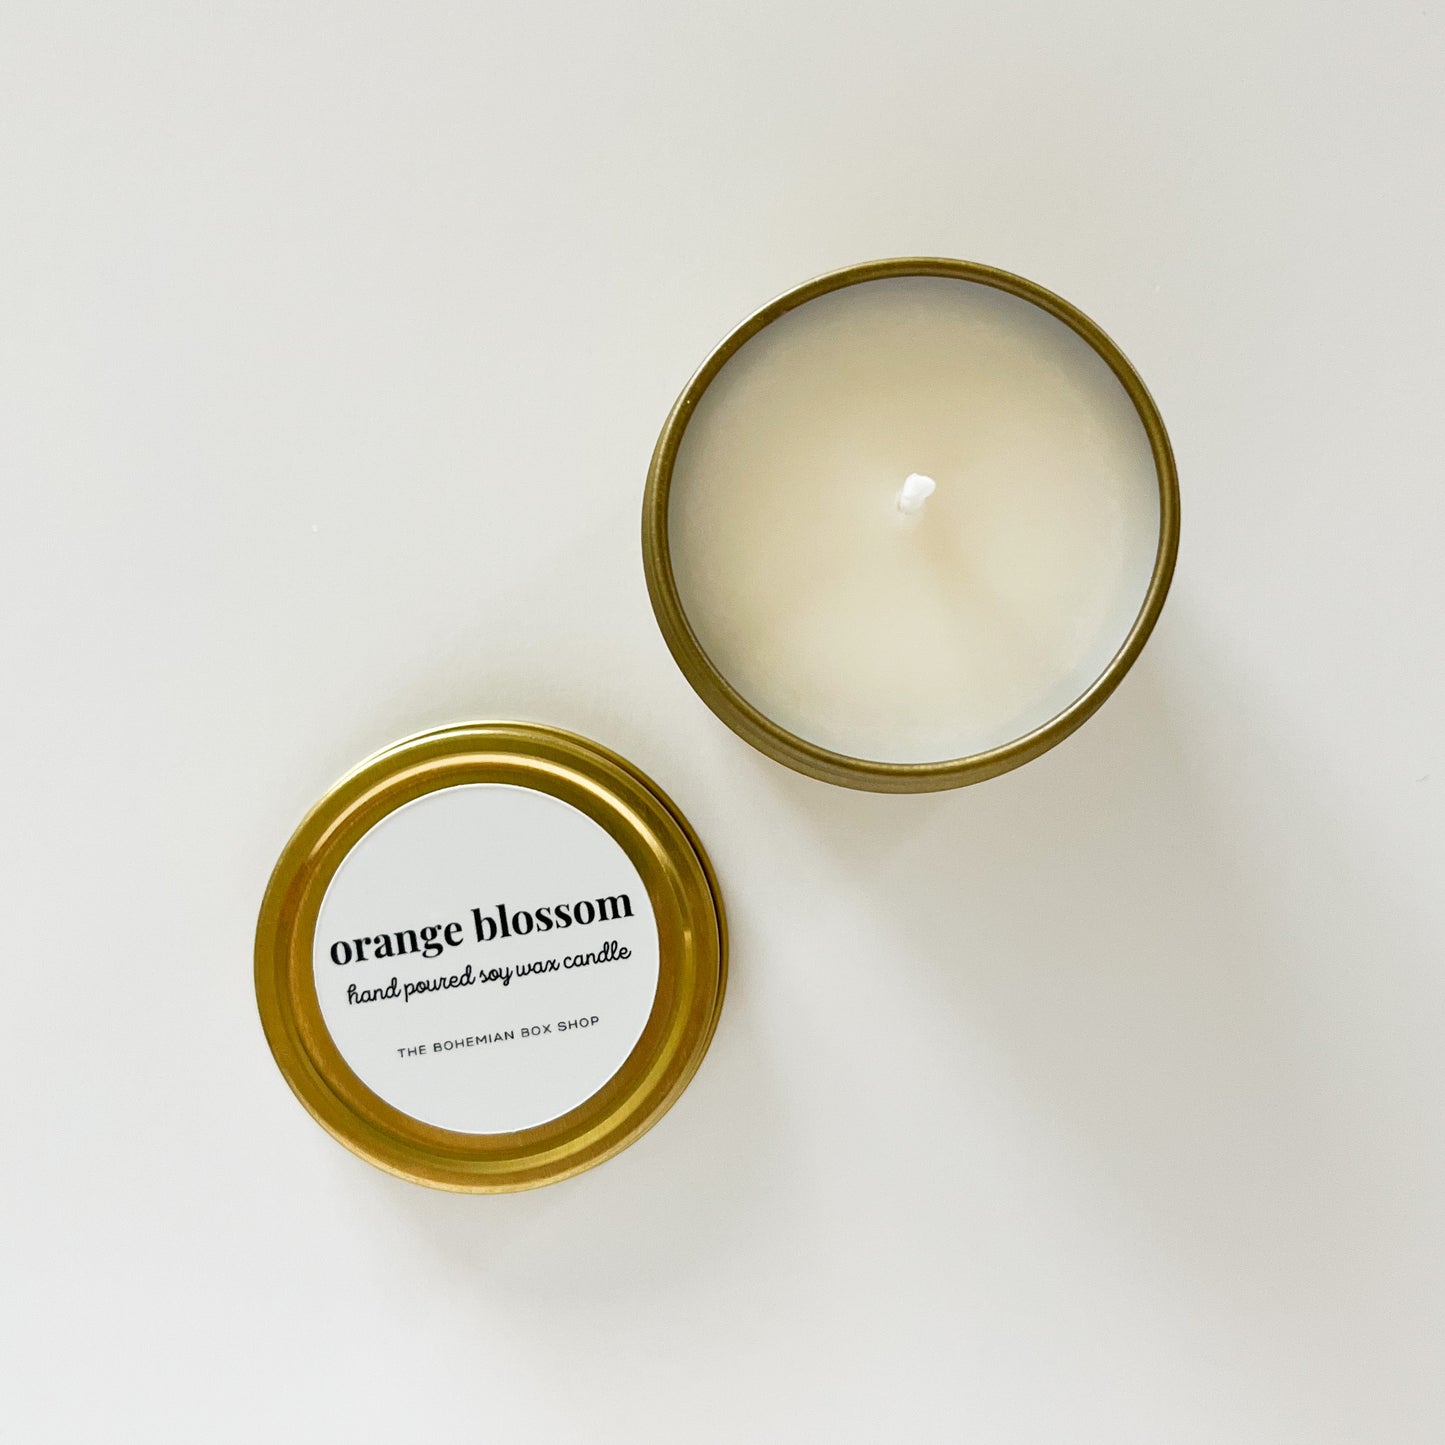 Orange blossom soy candle in a gold tin.